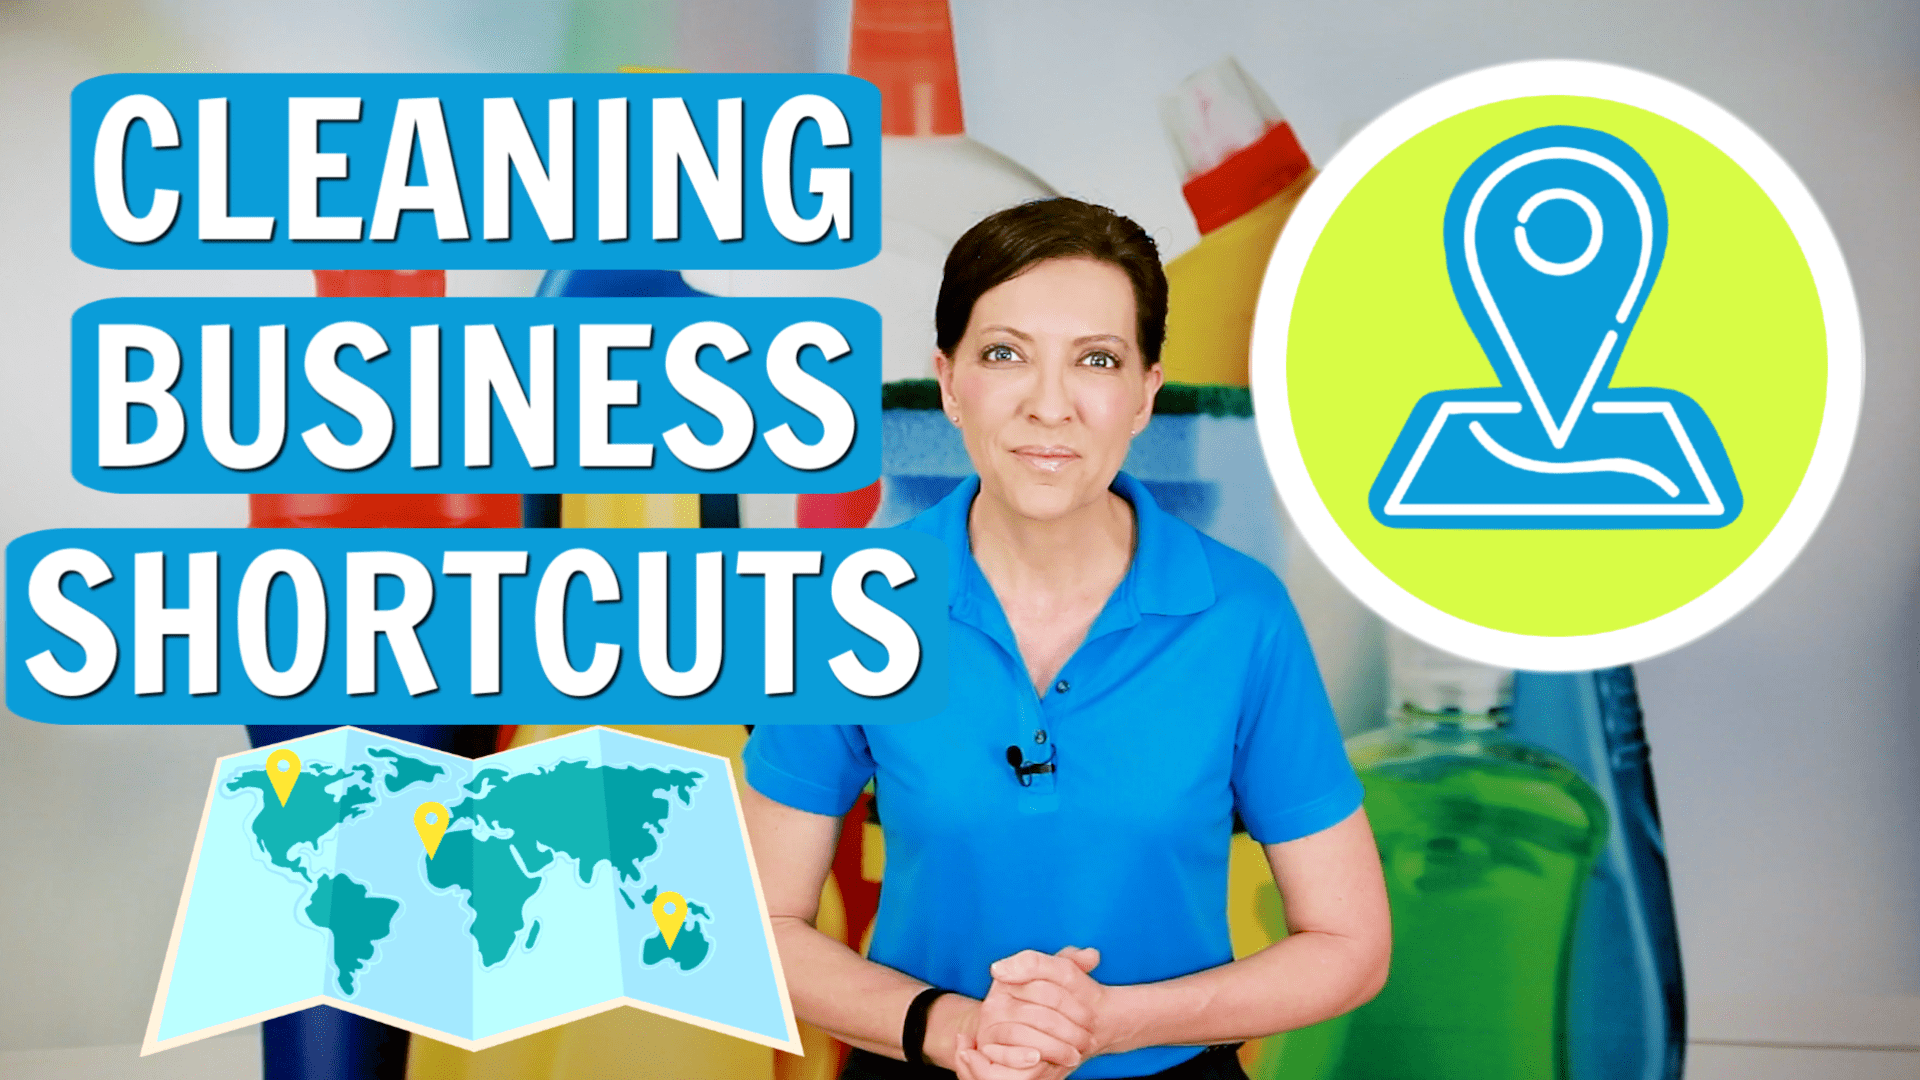 Cleaning Business Shortcuts, Angela Brown, Savvy Cleaner